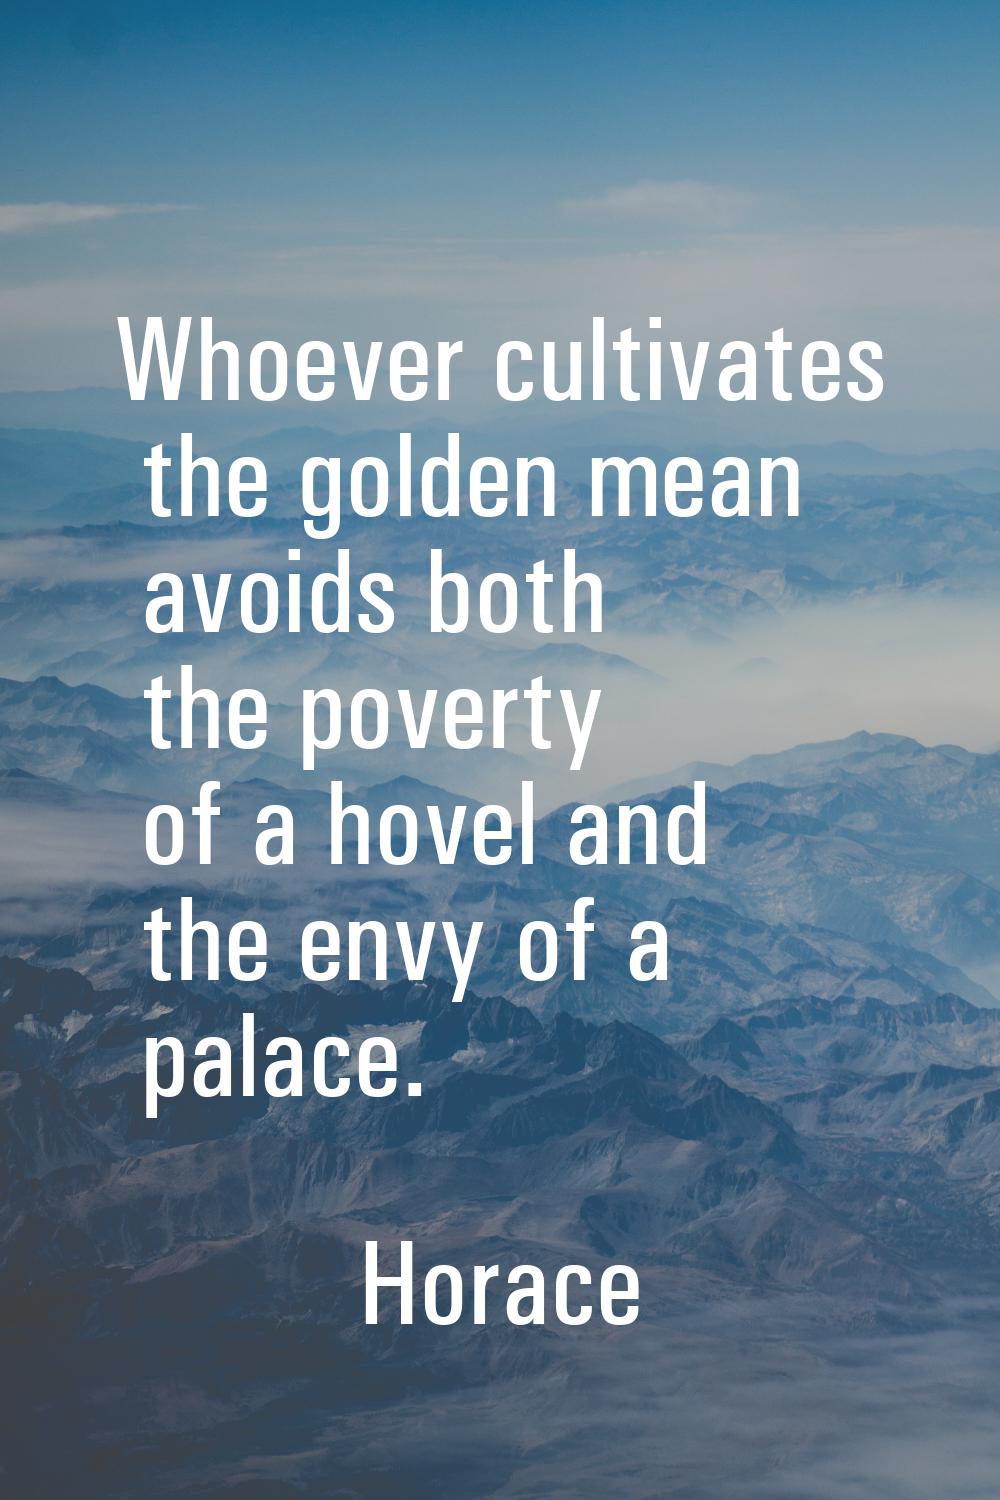 Whoever cultivates the golden mean avoids both the poverty of a hovel and the envy of a palace.